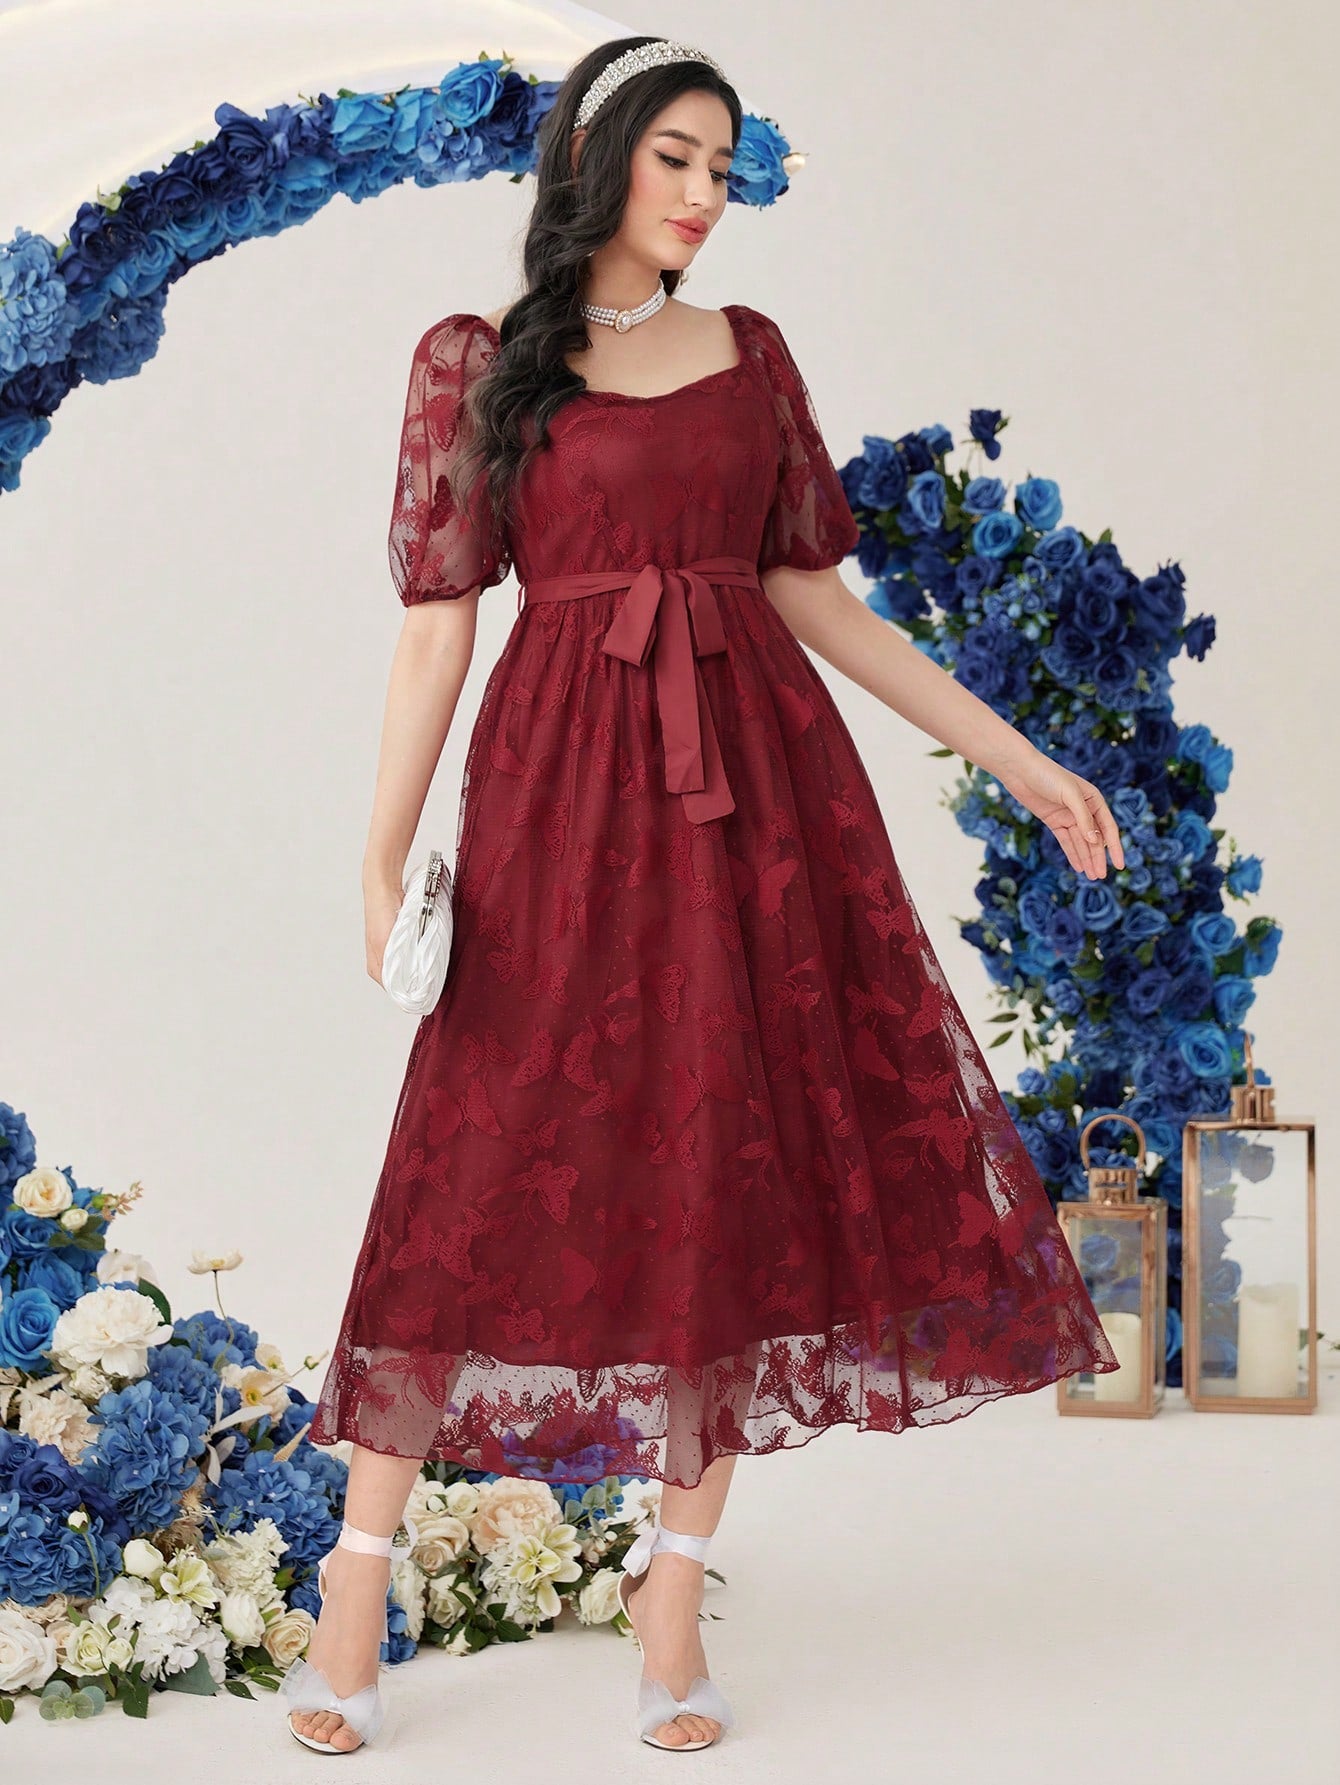 Heart Fluttering Like A Butterfly Embroidered Bubble Sleeve Square Neck Dress